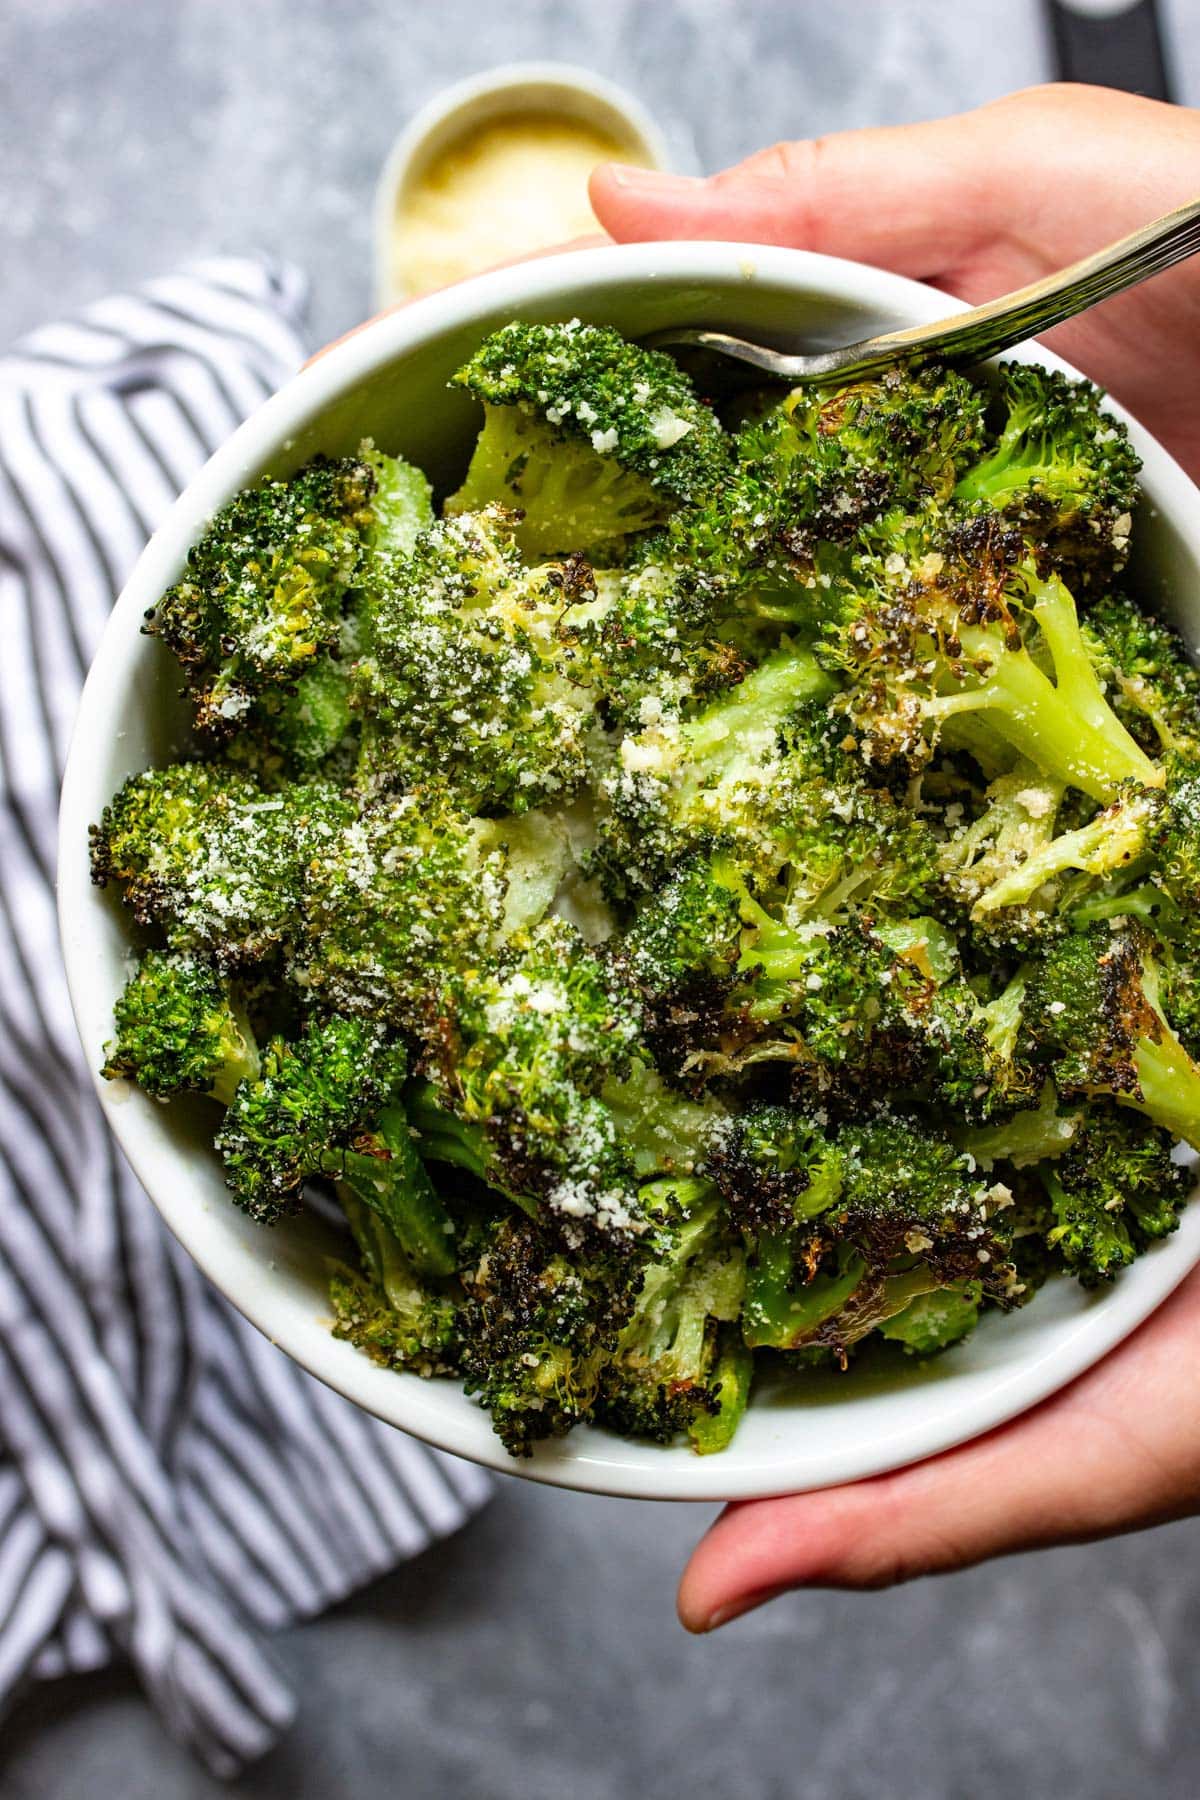 Garlic Parmesan roasted broccoli in a white bowl.